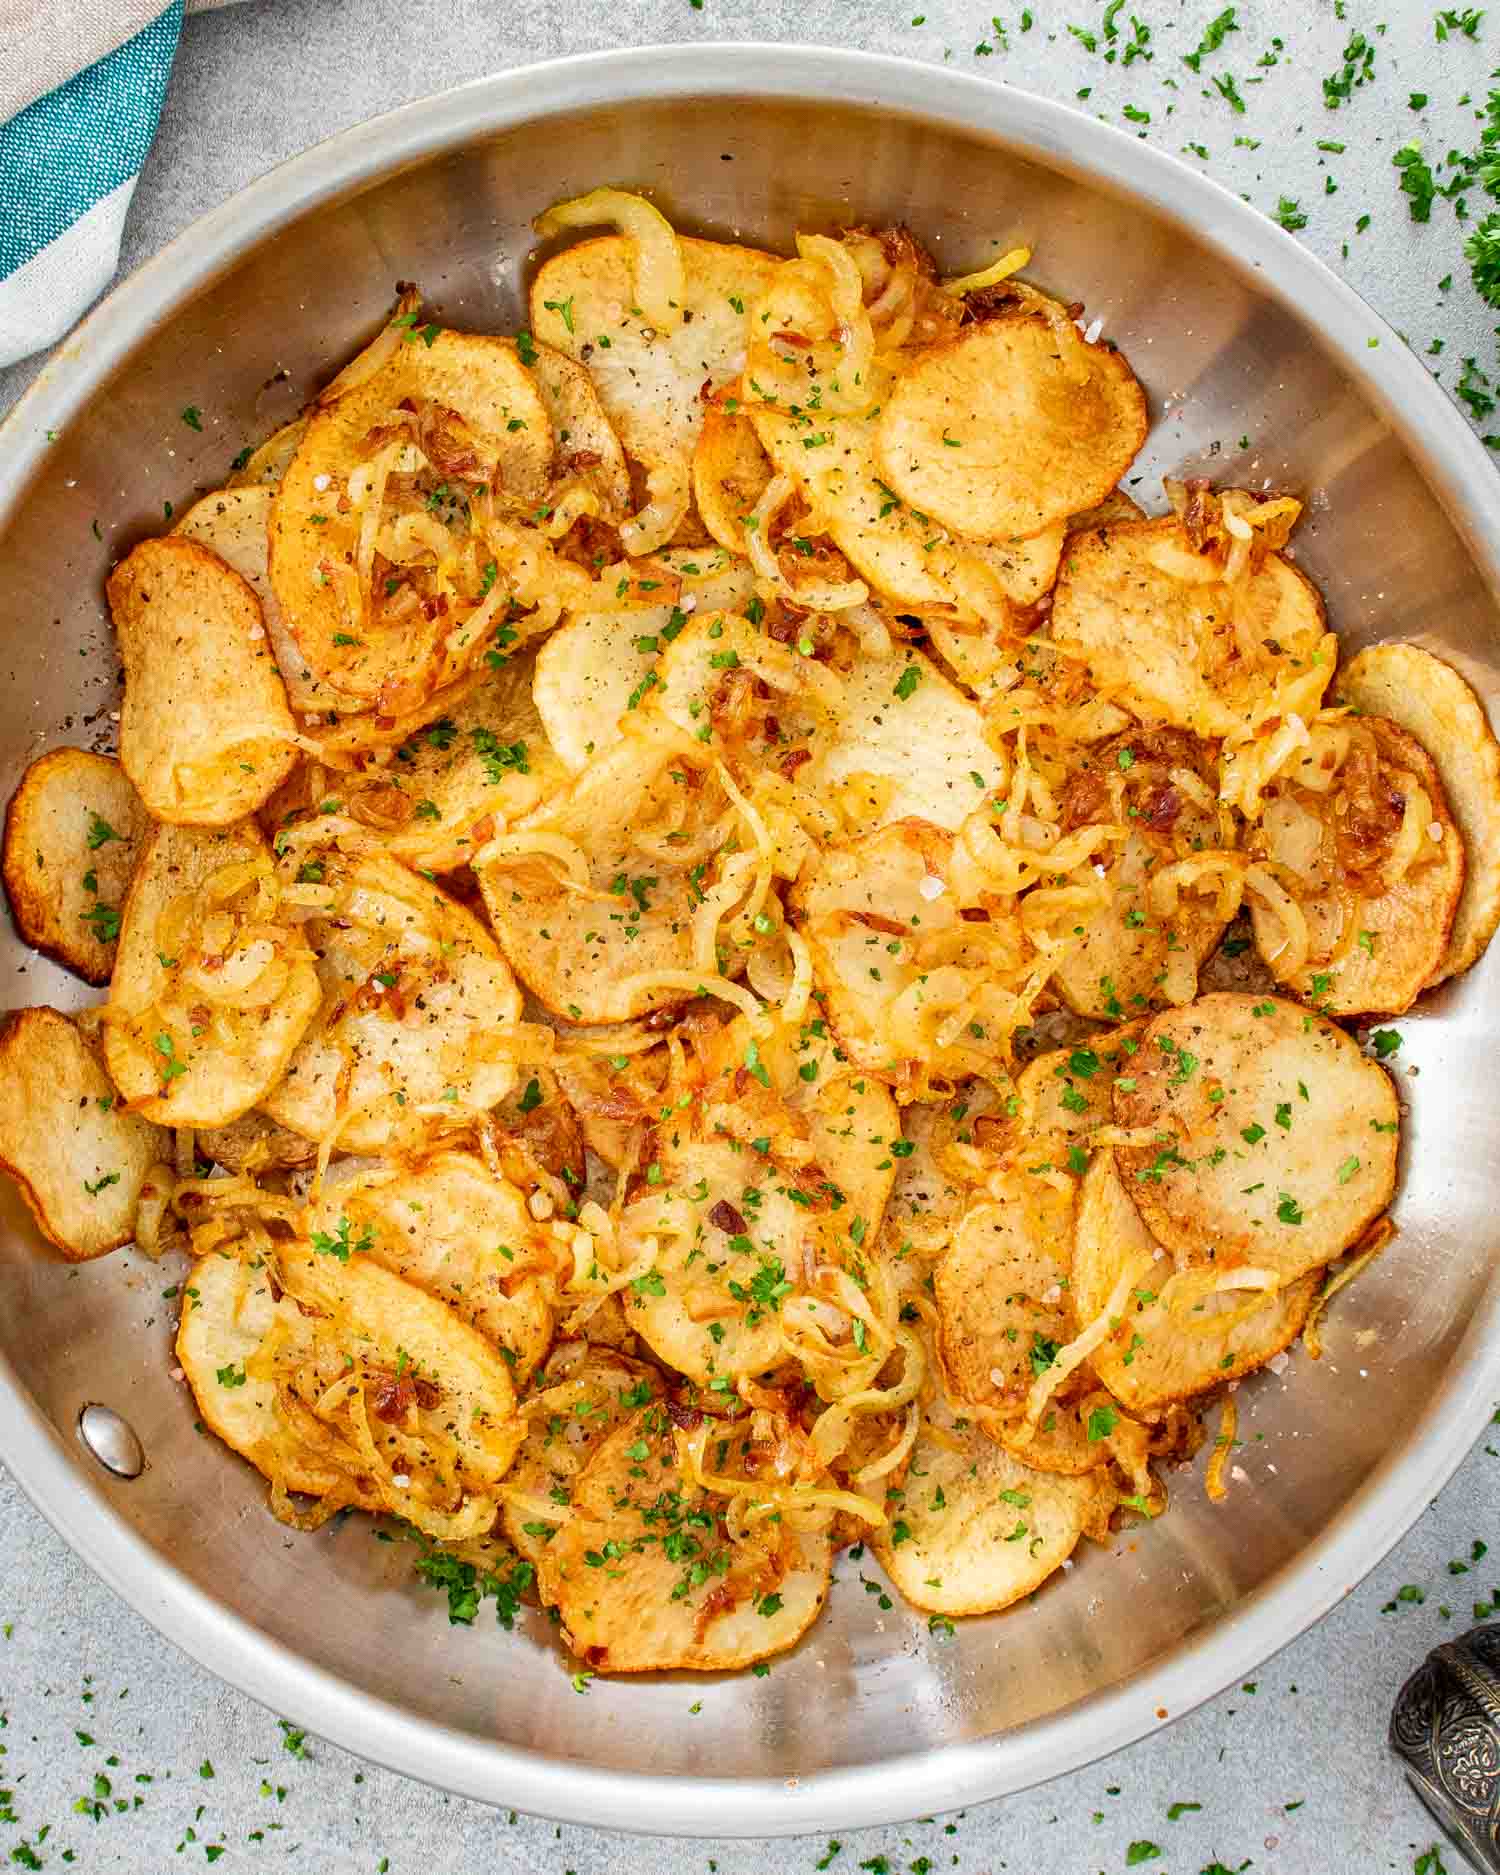 lyonnaise potatoes in a stainless steel skillet.